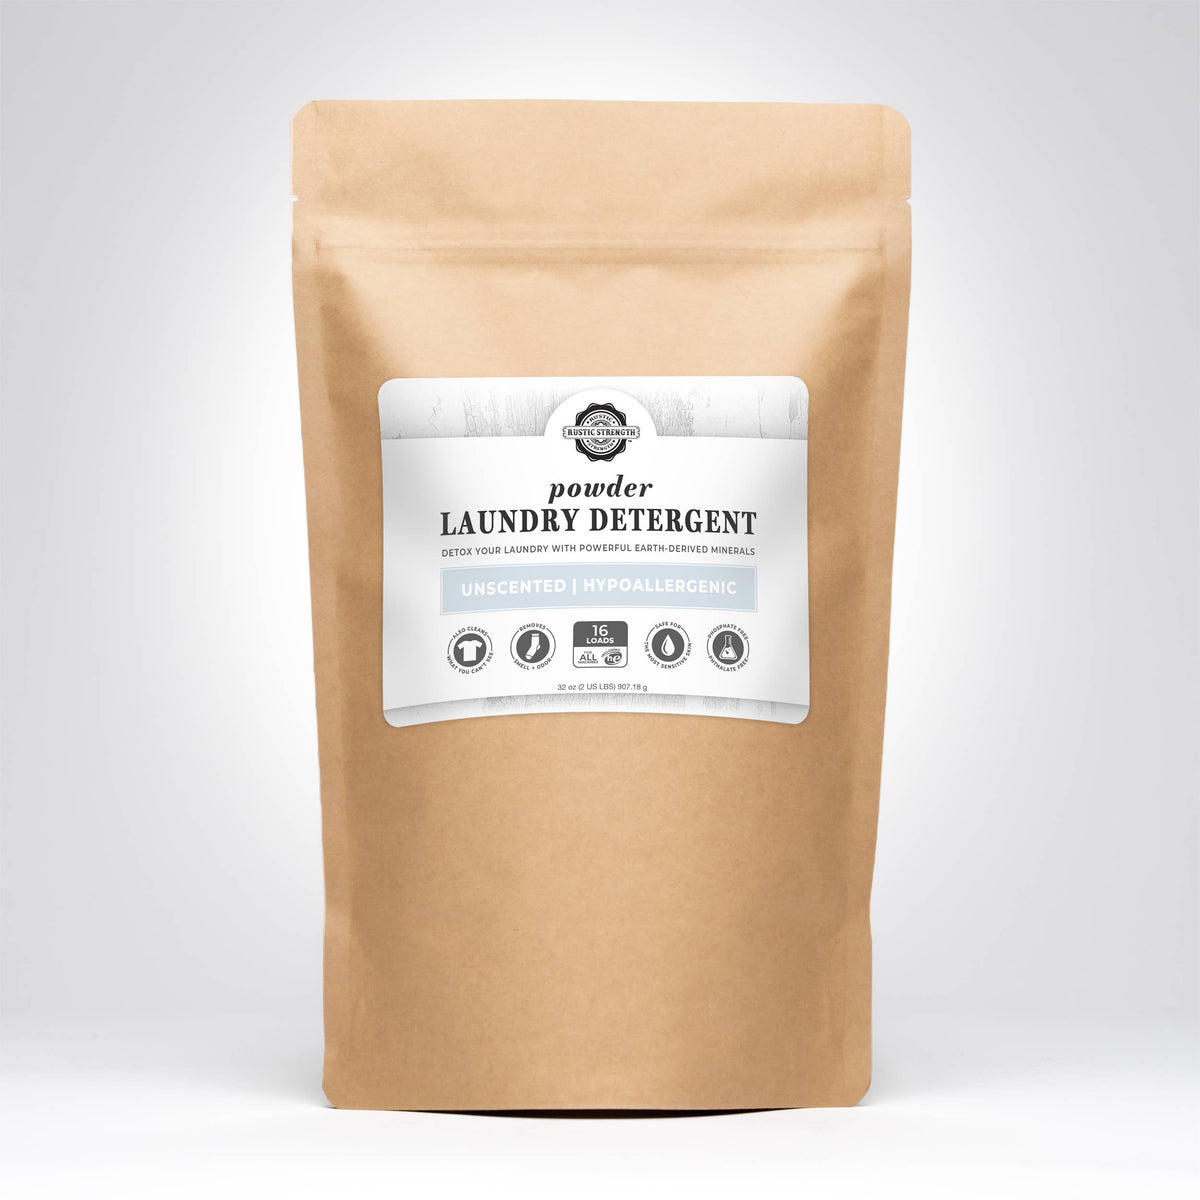 Rustic Strength - Powder Laundry Detergent | Hypoallergenic Laundry Care